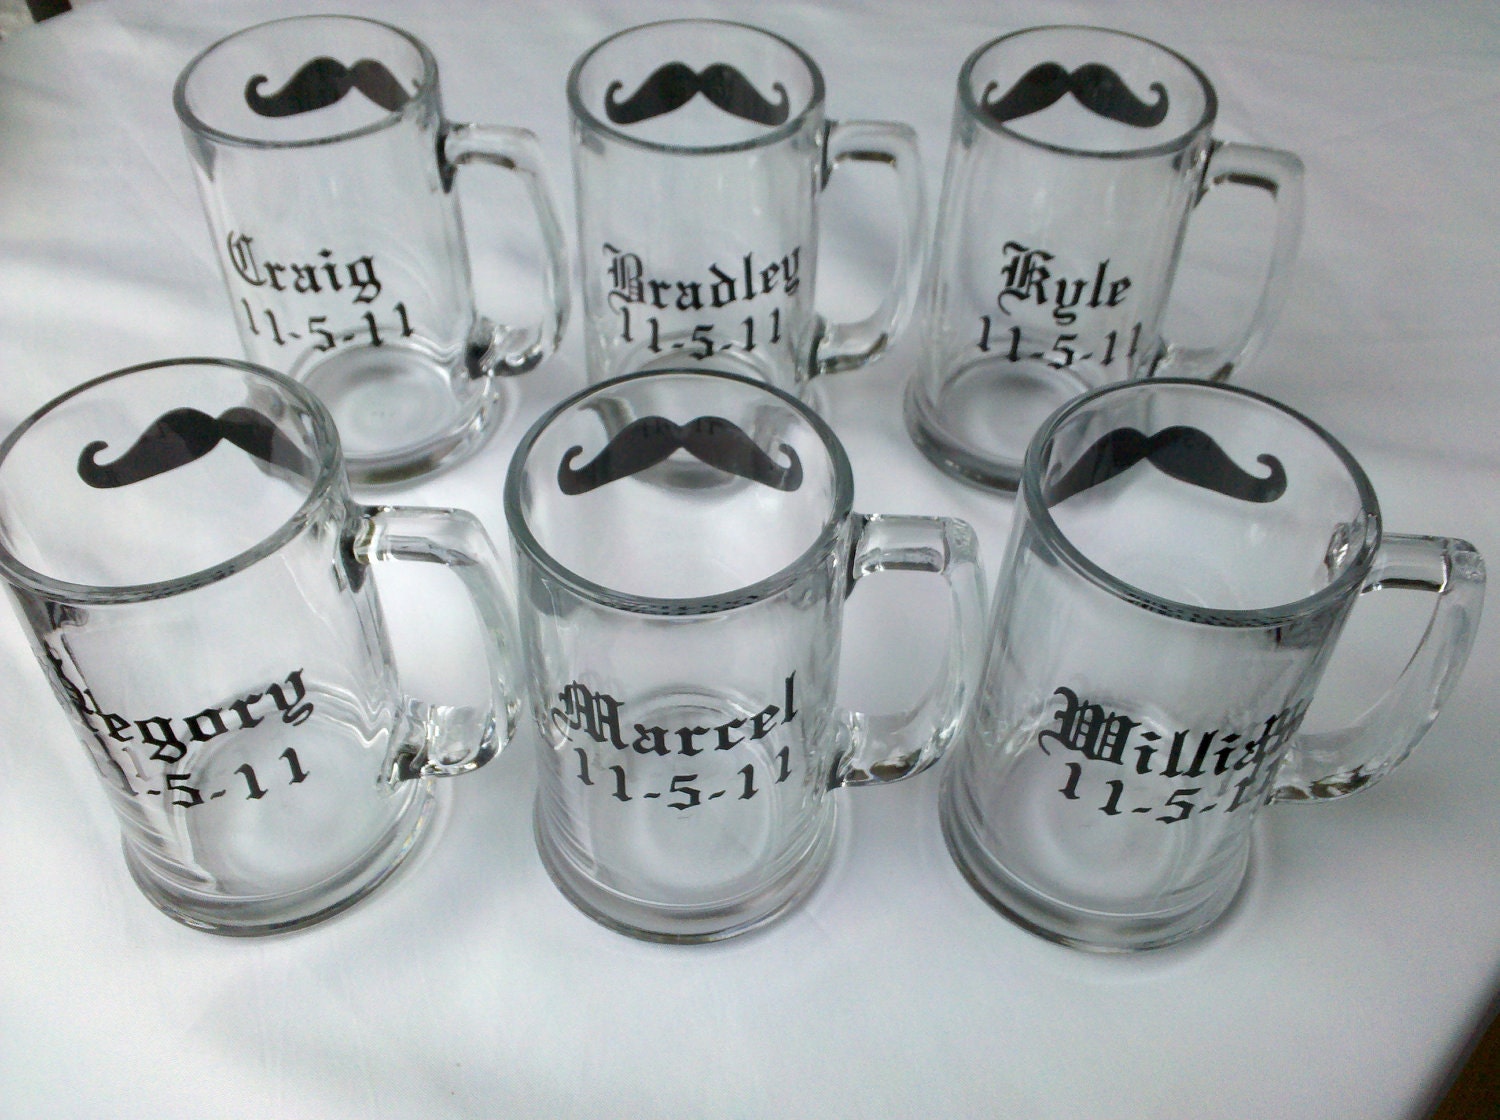 Gift for Groomsmen beer mugs, 6 Chalkboard mustache mugs personalized with name and wedding date